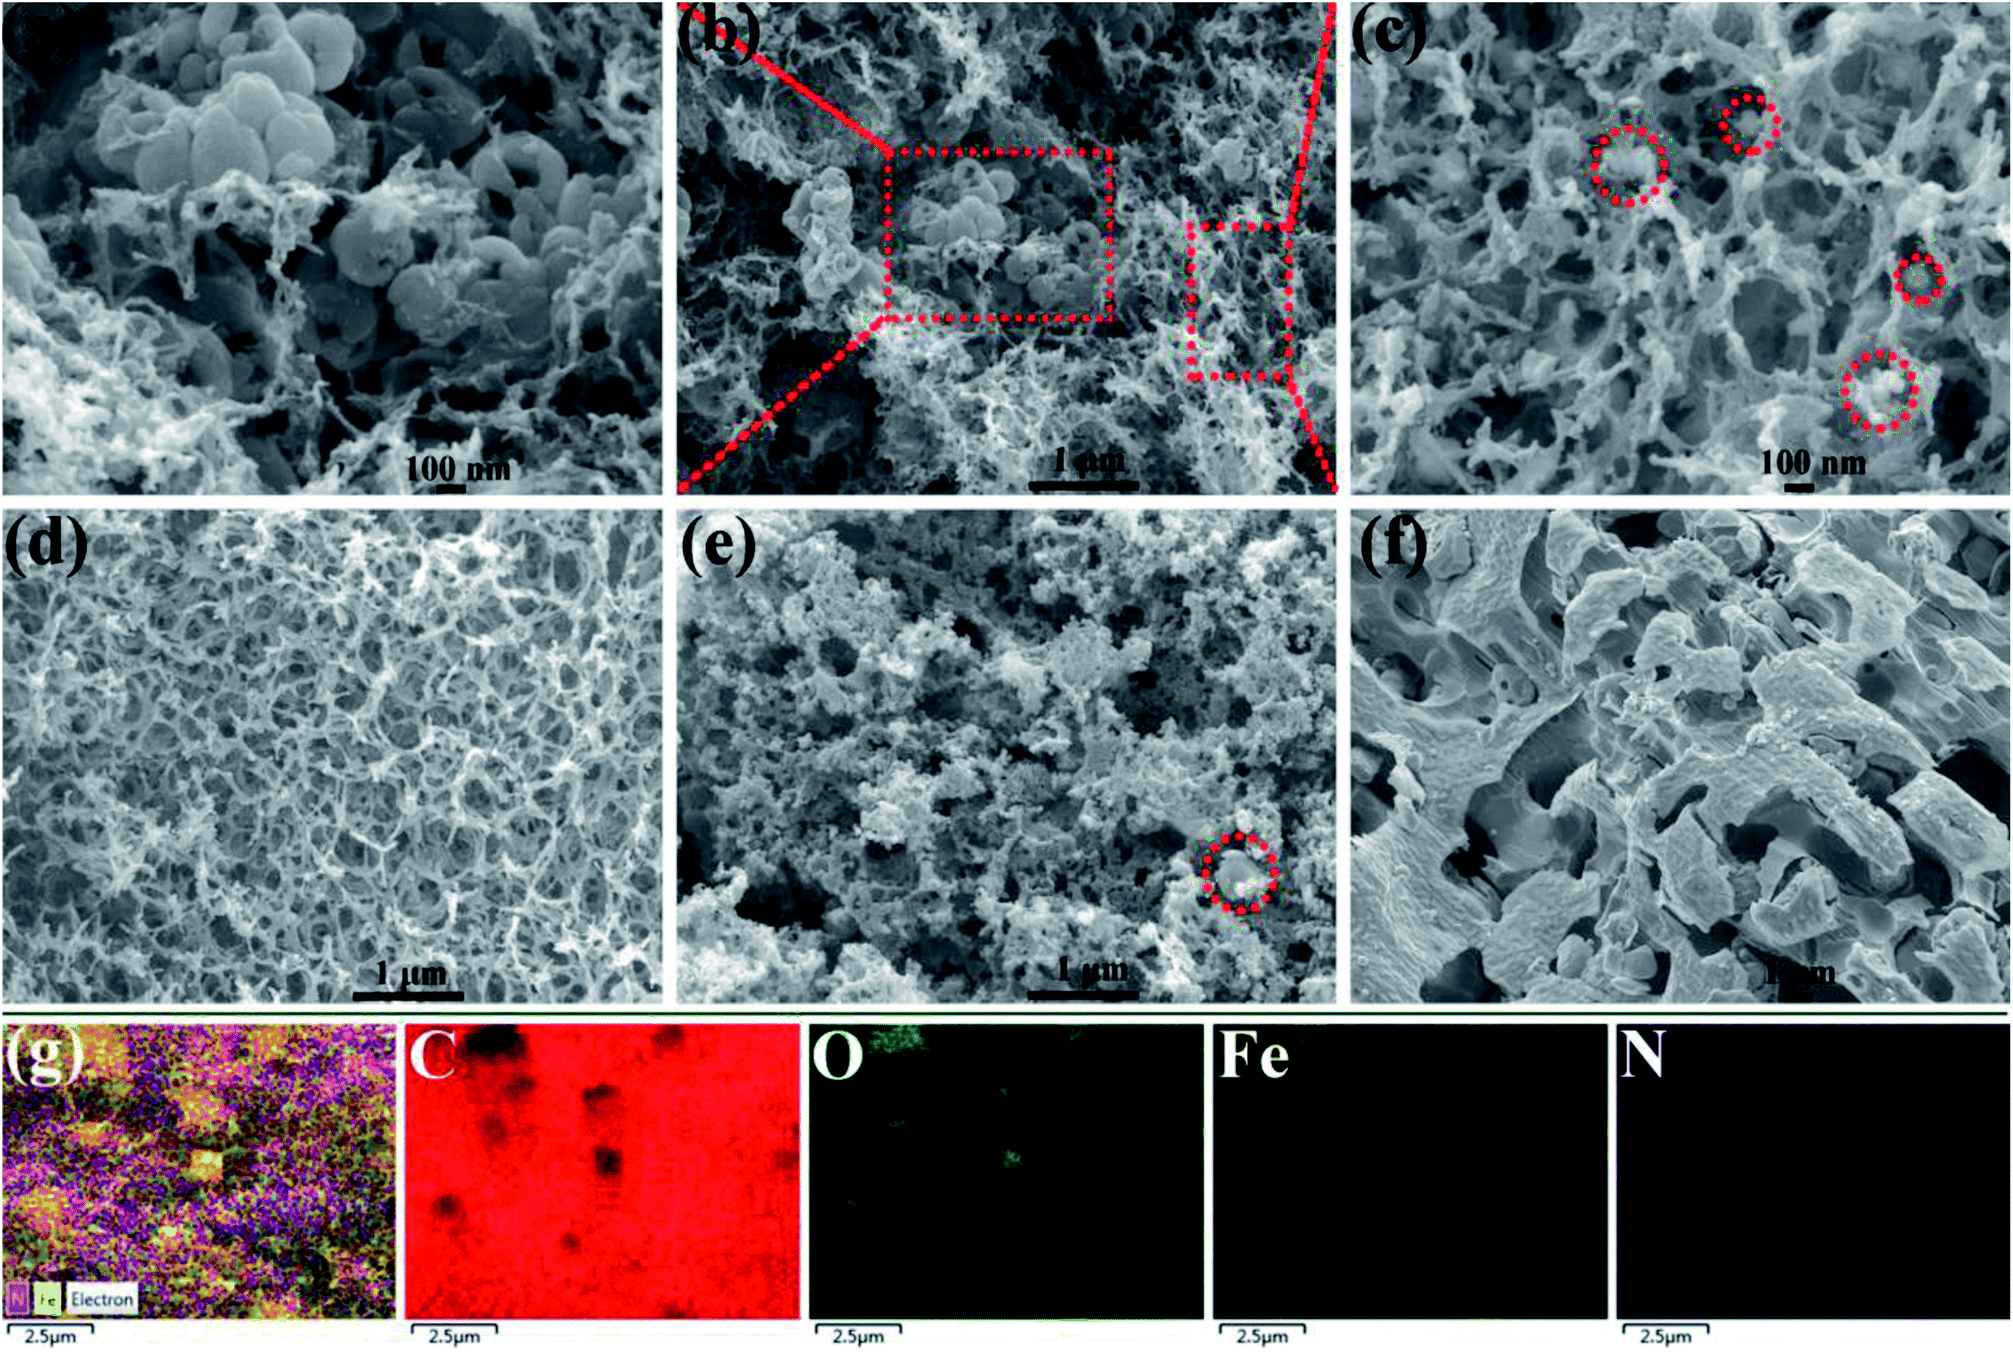 Dopamine Derived Cavities Fe 3 O 4 Nanoparticles Encapsulated Carbonaceous Composites With Self Generated Three Dimensional Network Structure As An Ex Rsc Advances Rsc Publishing Doi 10 1039 C8ra051a